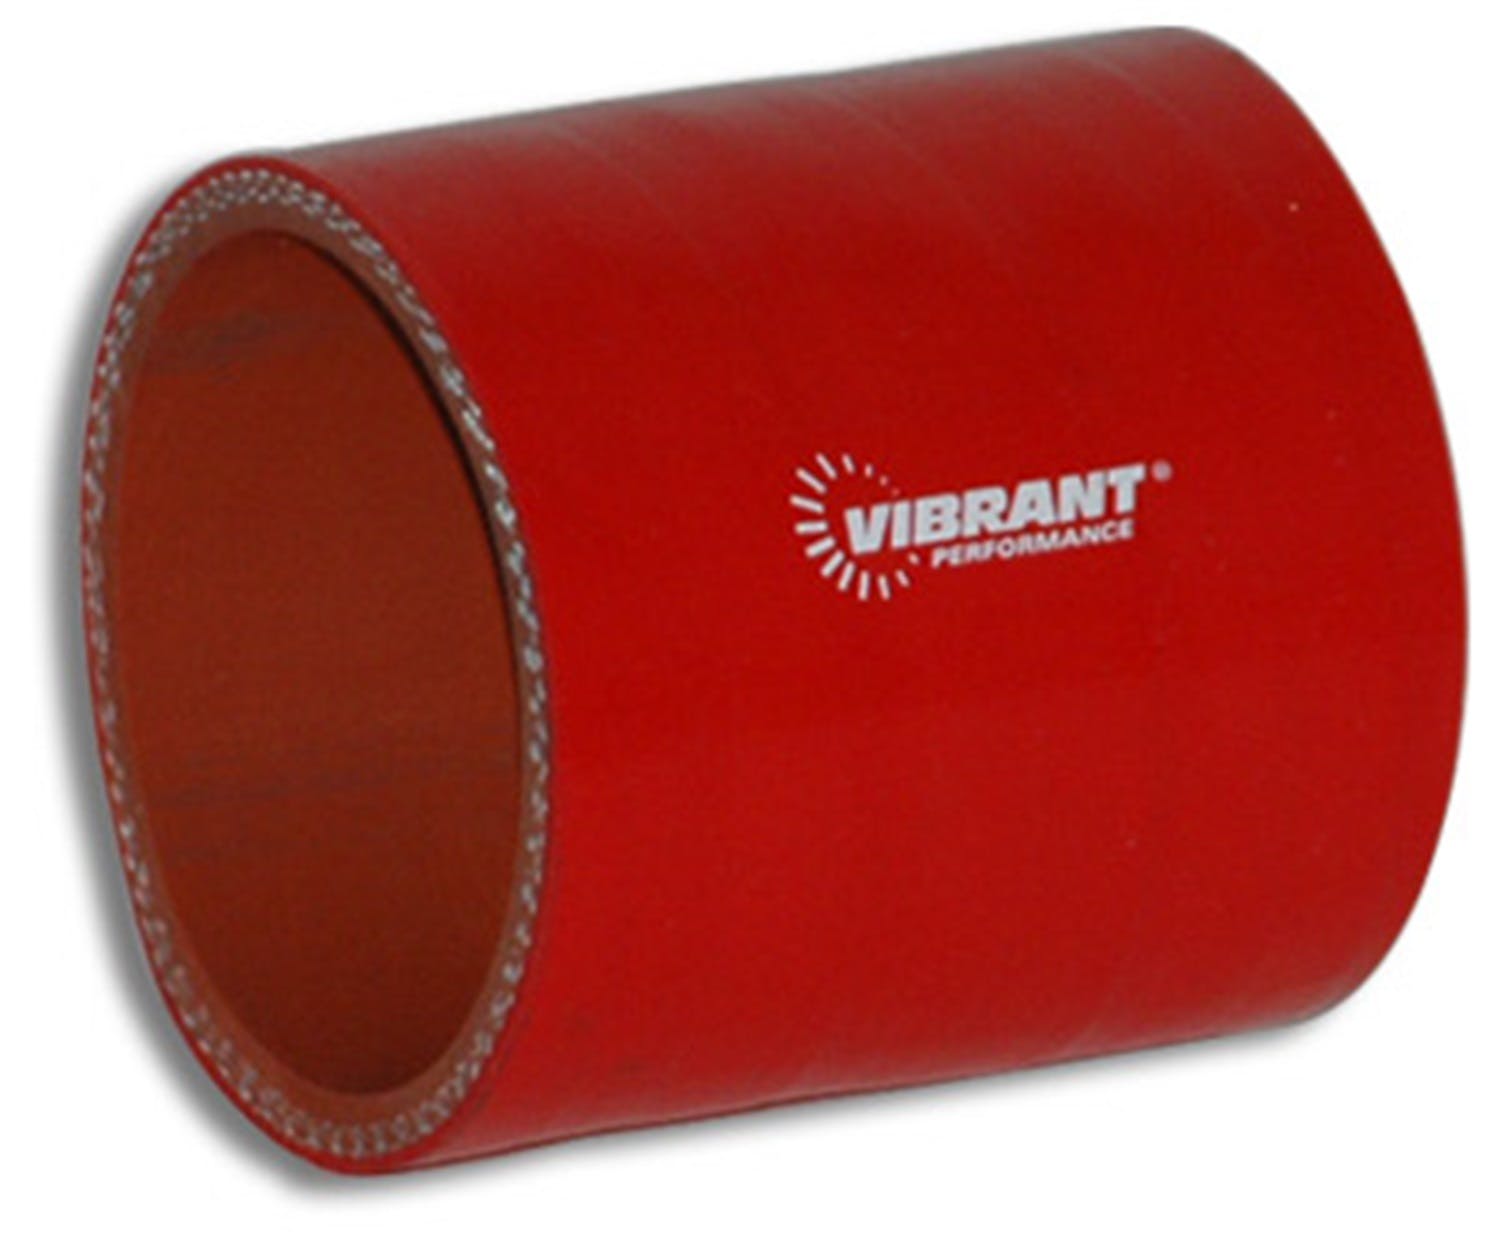 Vibrant Performance 2714R 4 Ply Silicone Sleeve, 3 inch I.D. x 3 inch Long - Red